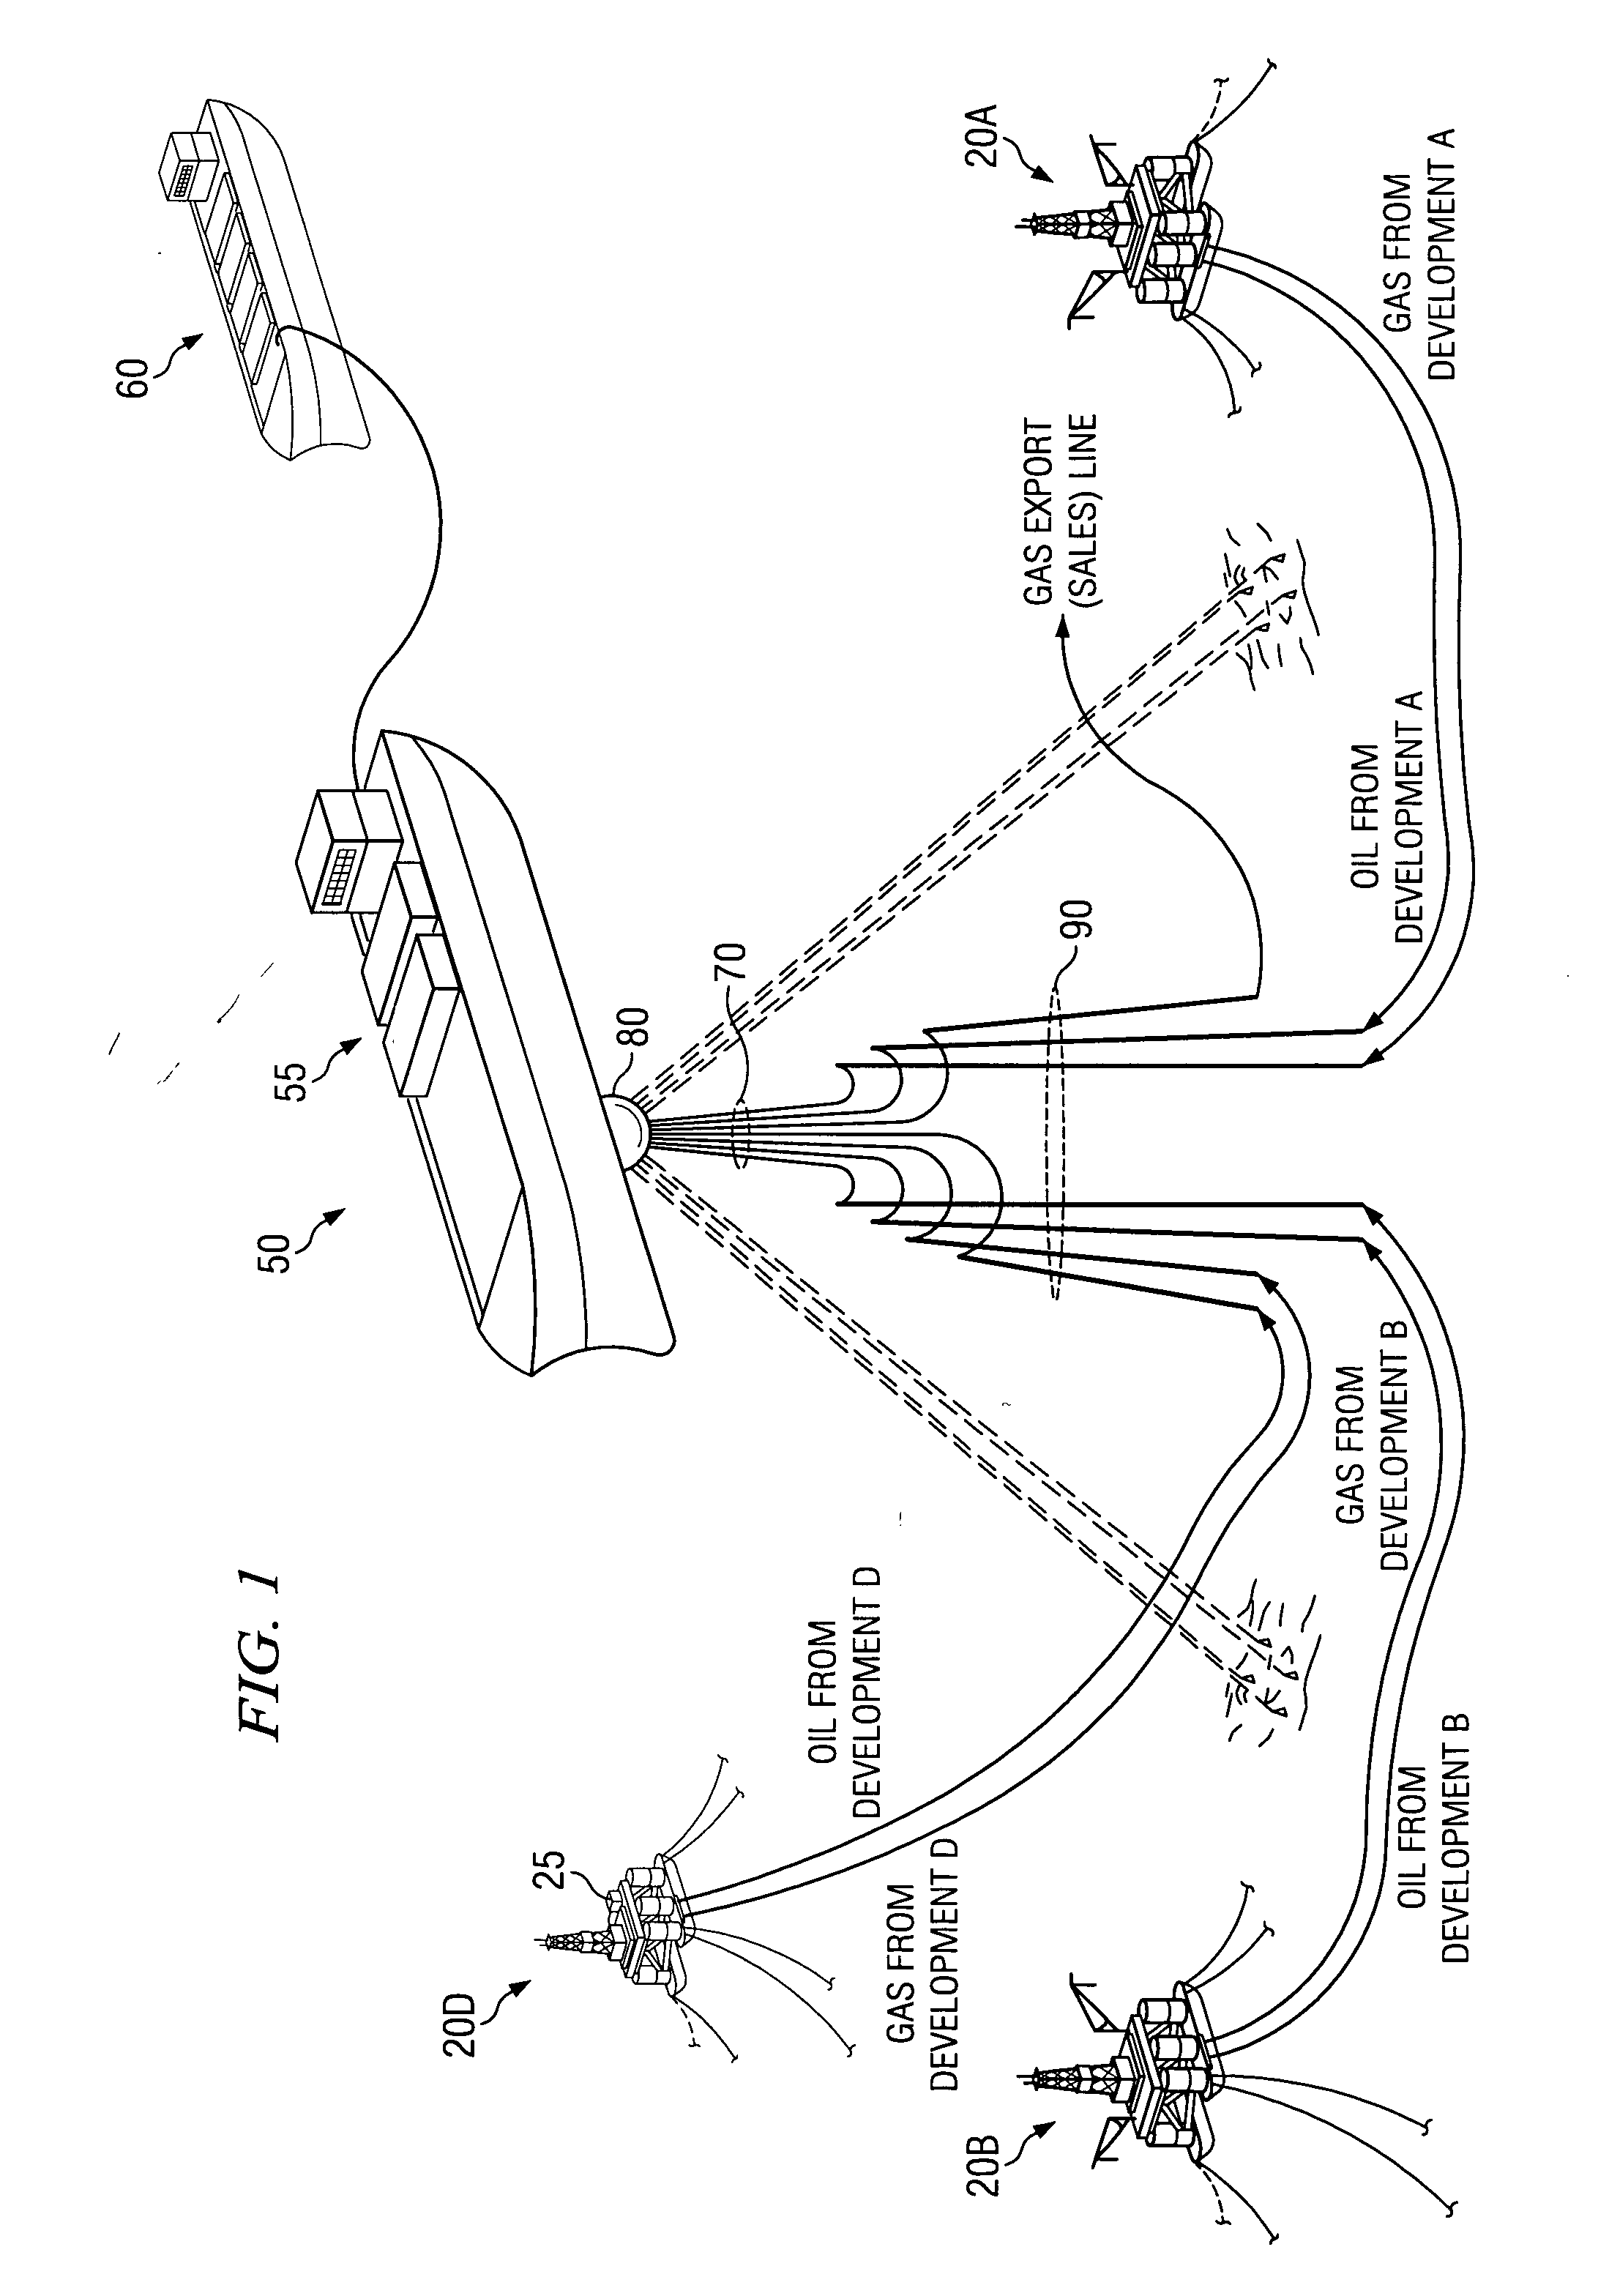 Method and system for gathering, transporting and marketing offshore oil and gas